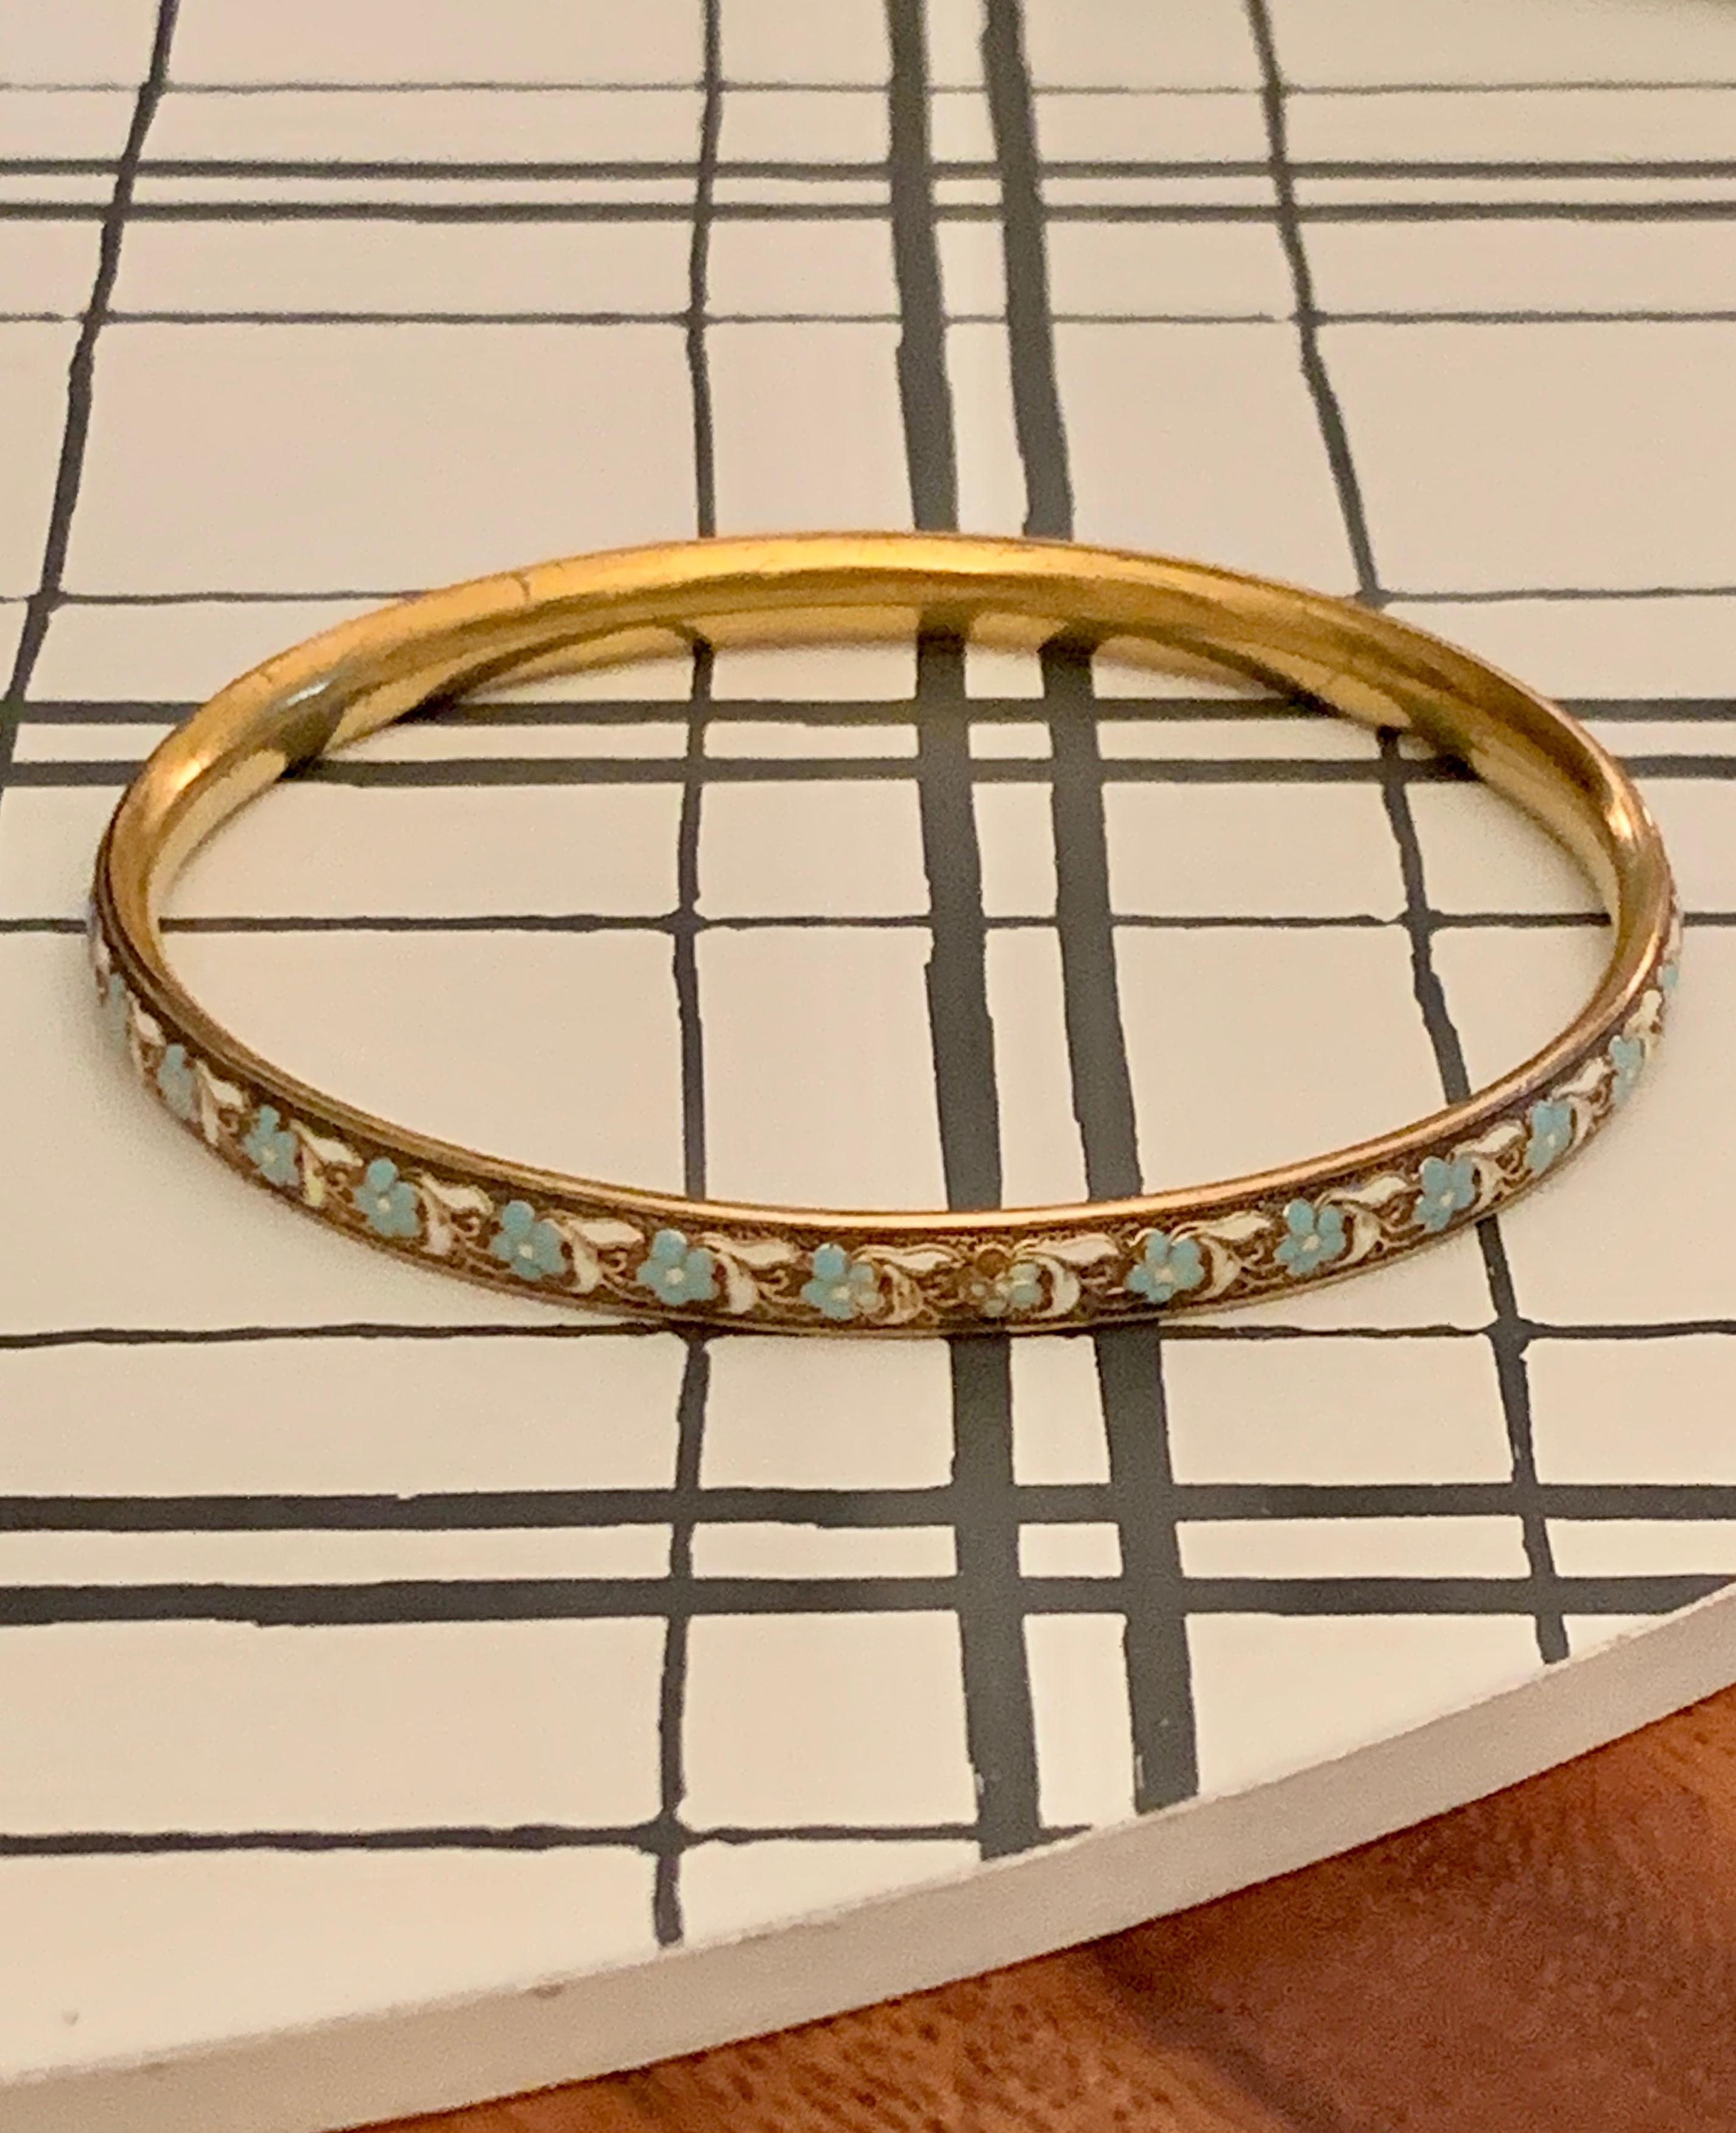 This piece is absolutely lovely and could be worn alone, or in combination with so many other bangles or bracelets.  This is a vintage Krementz signed 14 karat yellow Gold bangle.  The enameled floral design is a beautiful color of blue with white